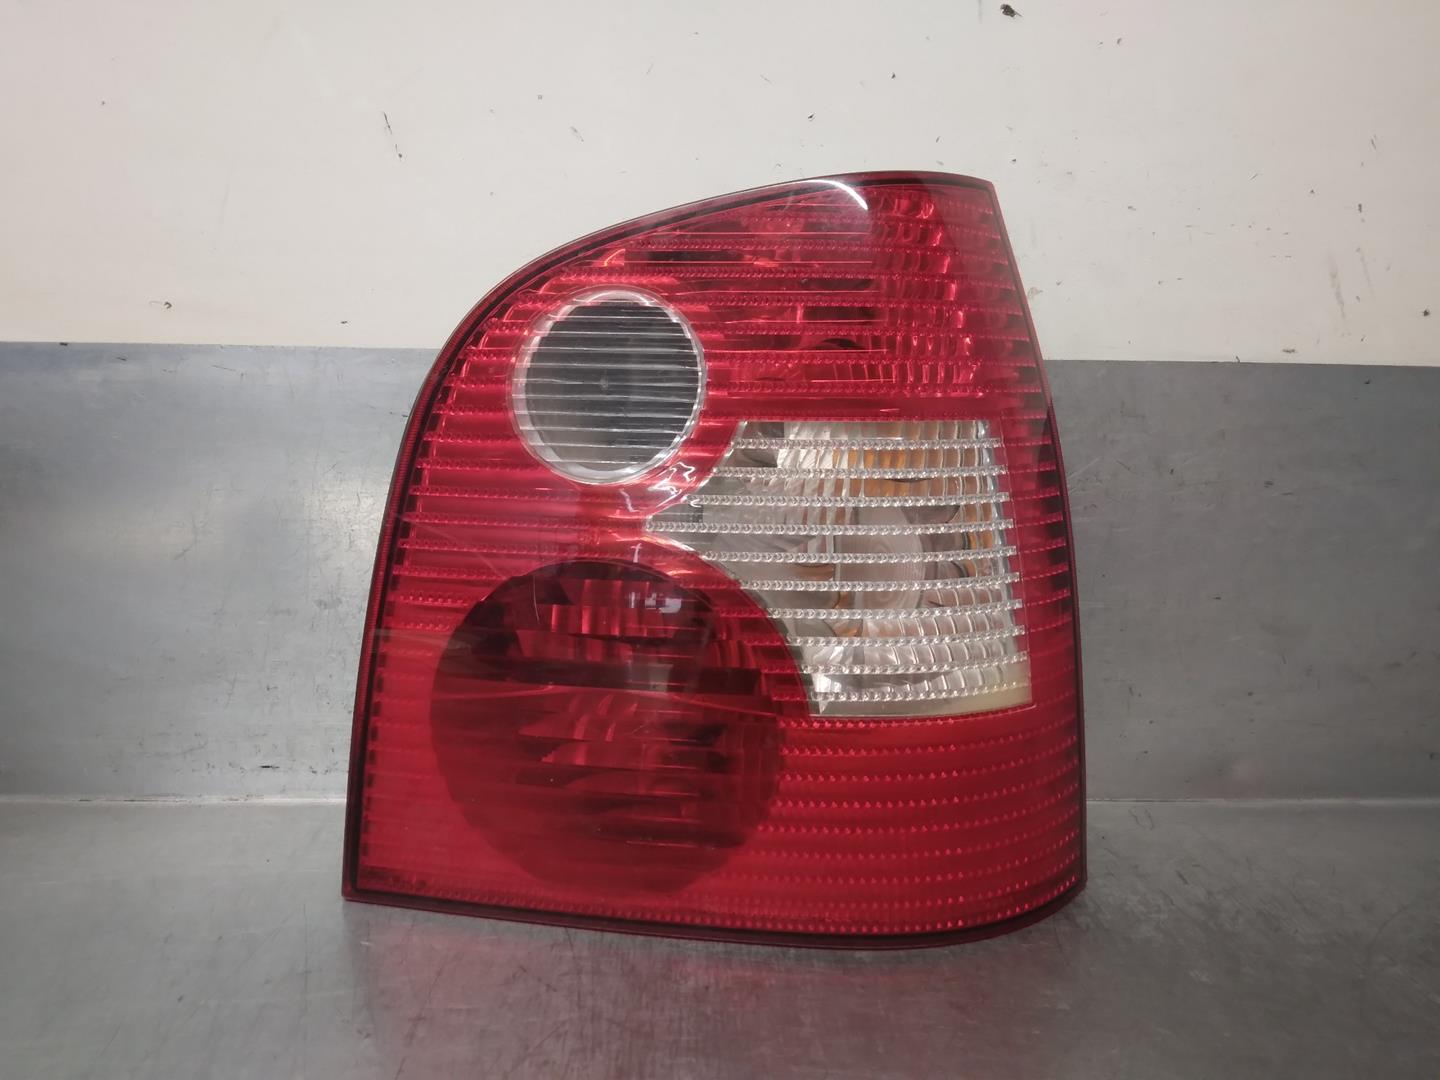 VOLKSWAGEN Polo 4 generation (2001-2009) Rear Right Taillight Lamp 6Q6945258A, 5PUERTAS 19930504